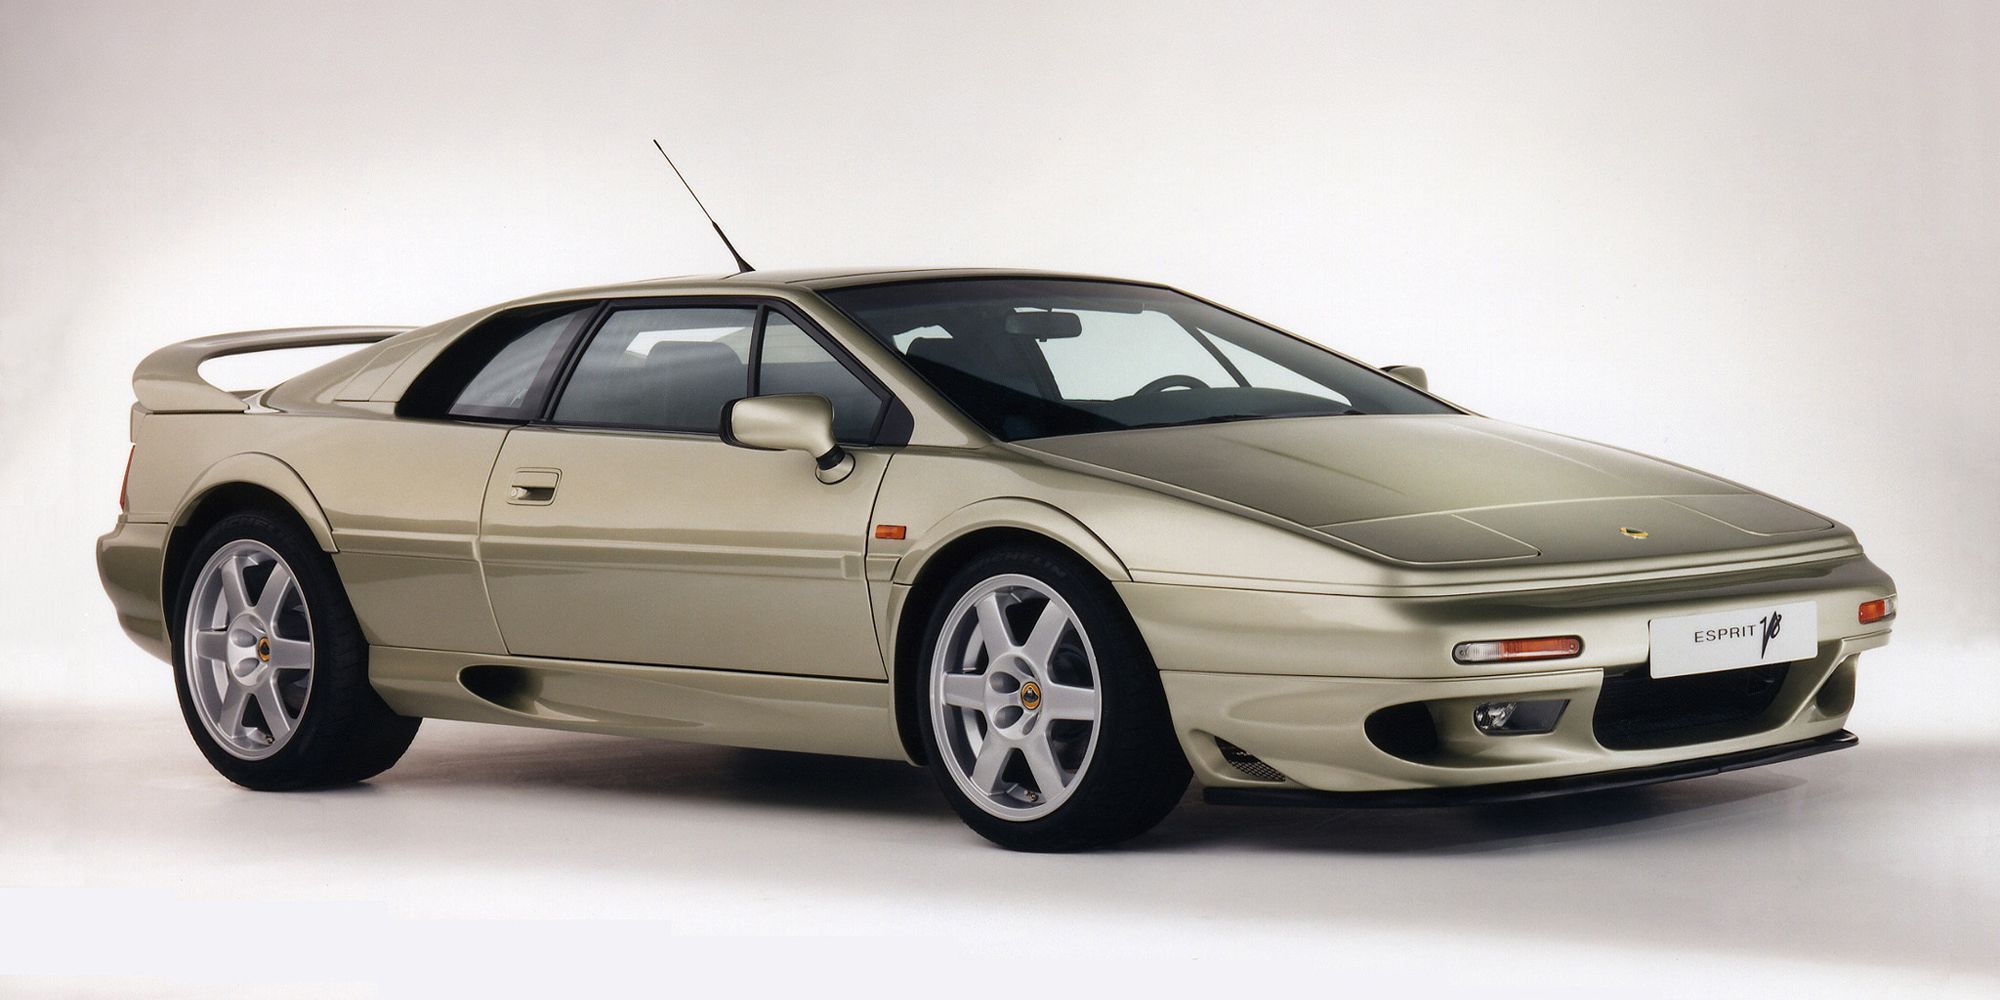 Front 3/4 view of the Lotus Esprit V8